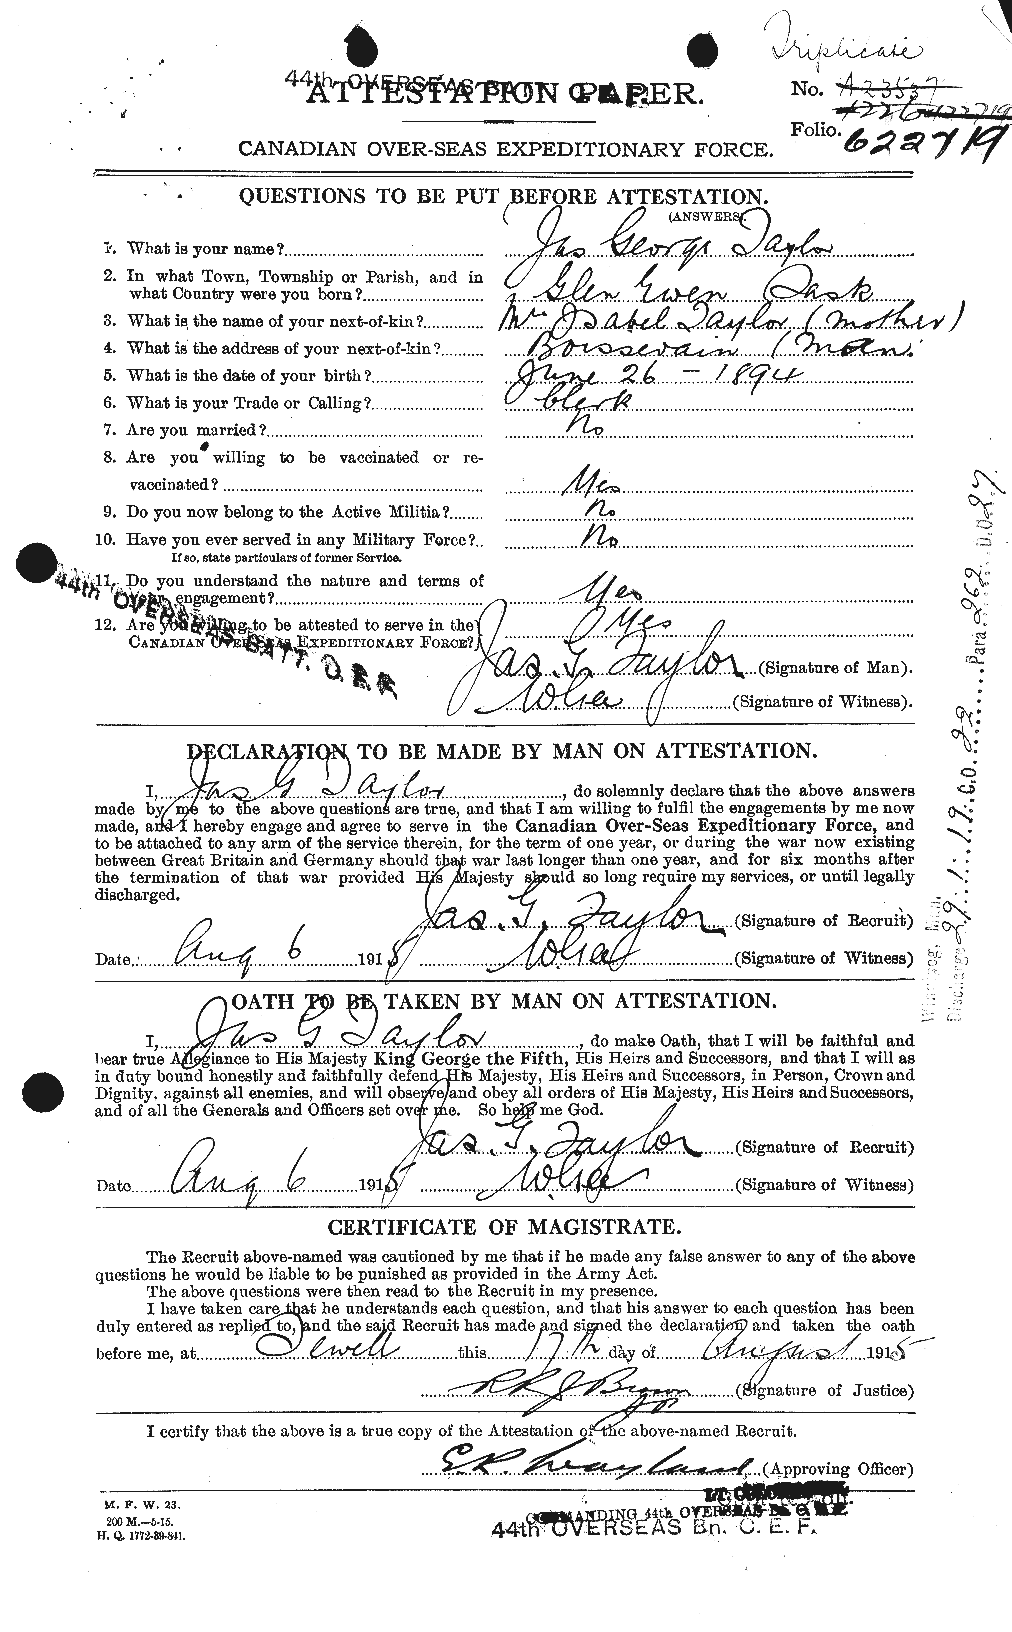 Personnel Records of the First World War - CEF 626919a